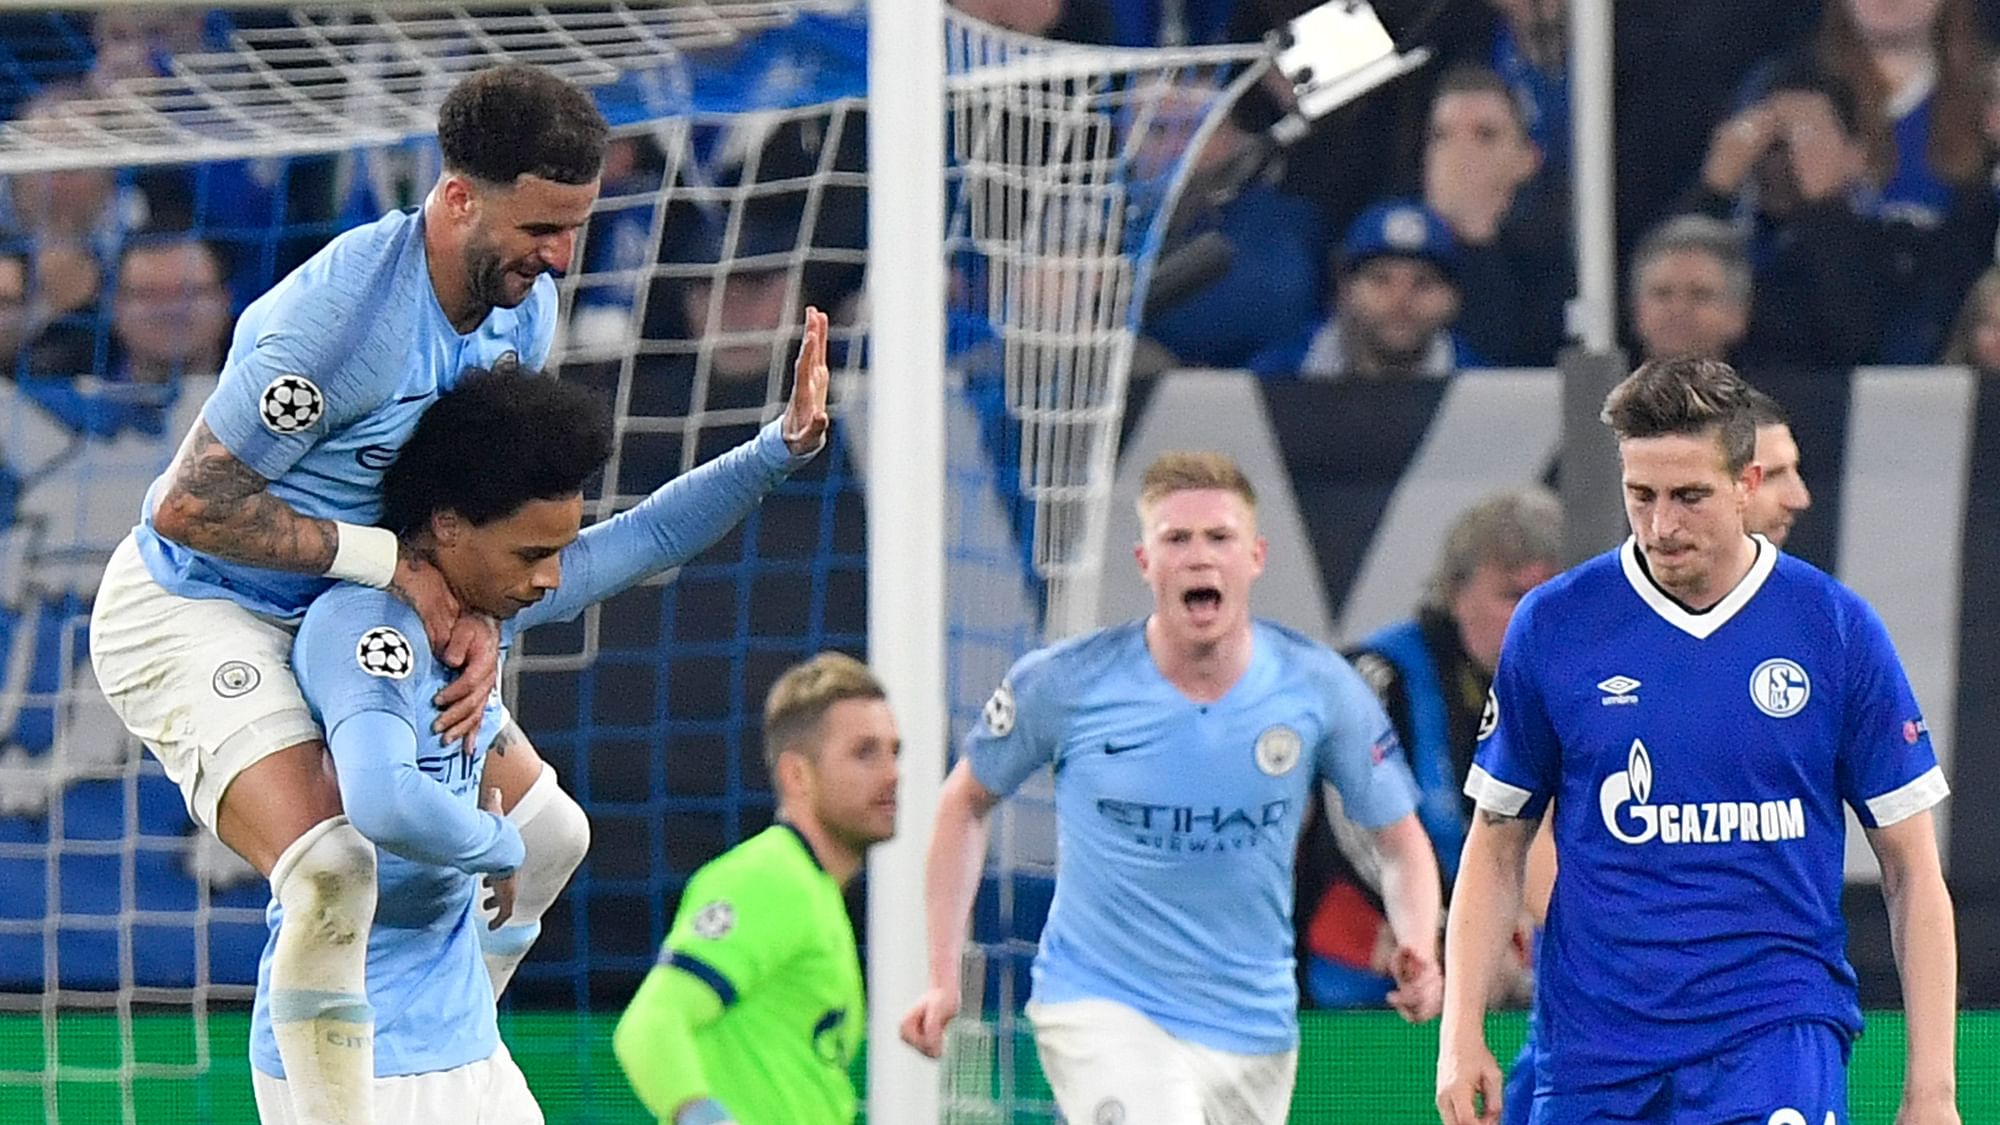 Leroy Sane (hand raised), a former Schalke player, reacts after scoring Manchester City’s equaliser in the UEFA Champions League round of 16 first leg clash at Gelsenkirchen.